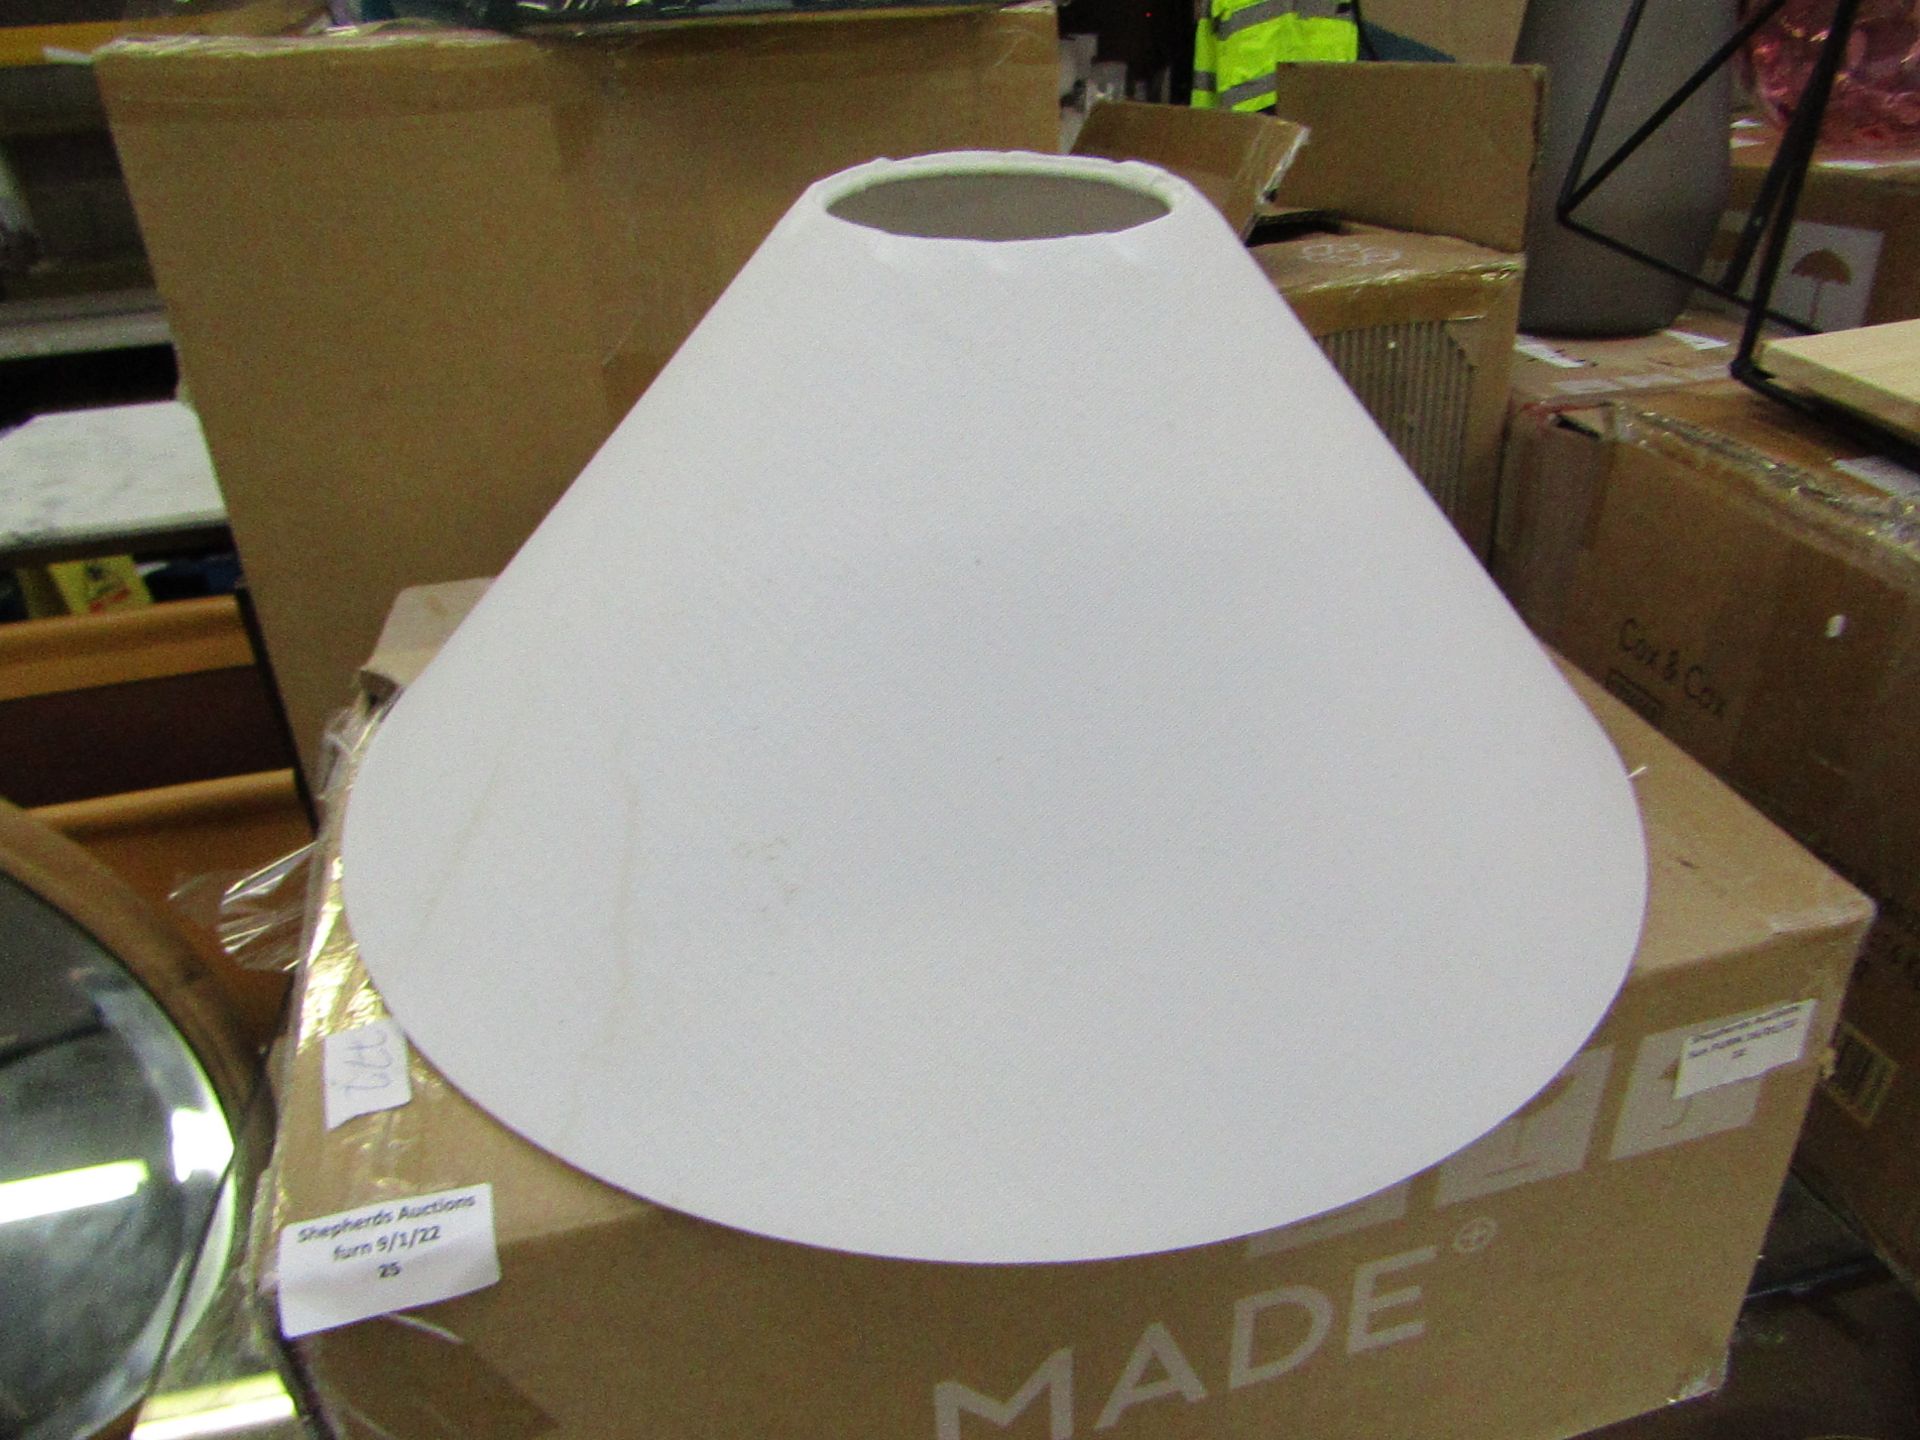 | 1X | MADE.COM ALIZ TEXTURED CONICAL SHADE | WHITE | UNCHECKED & BOXED | RRP £- |